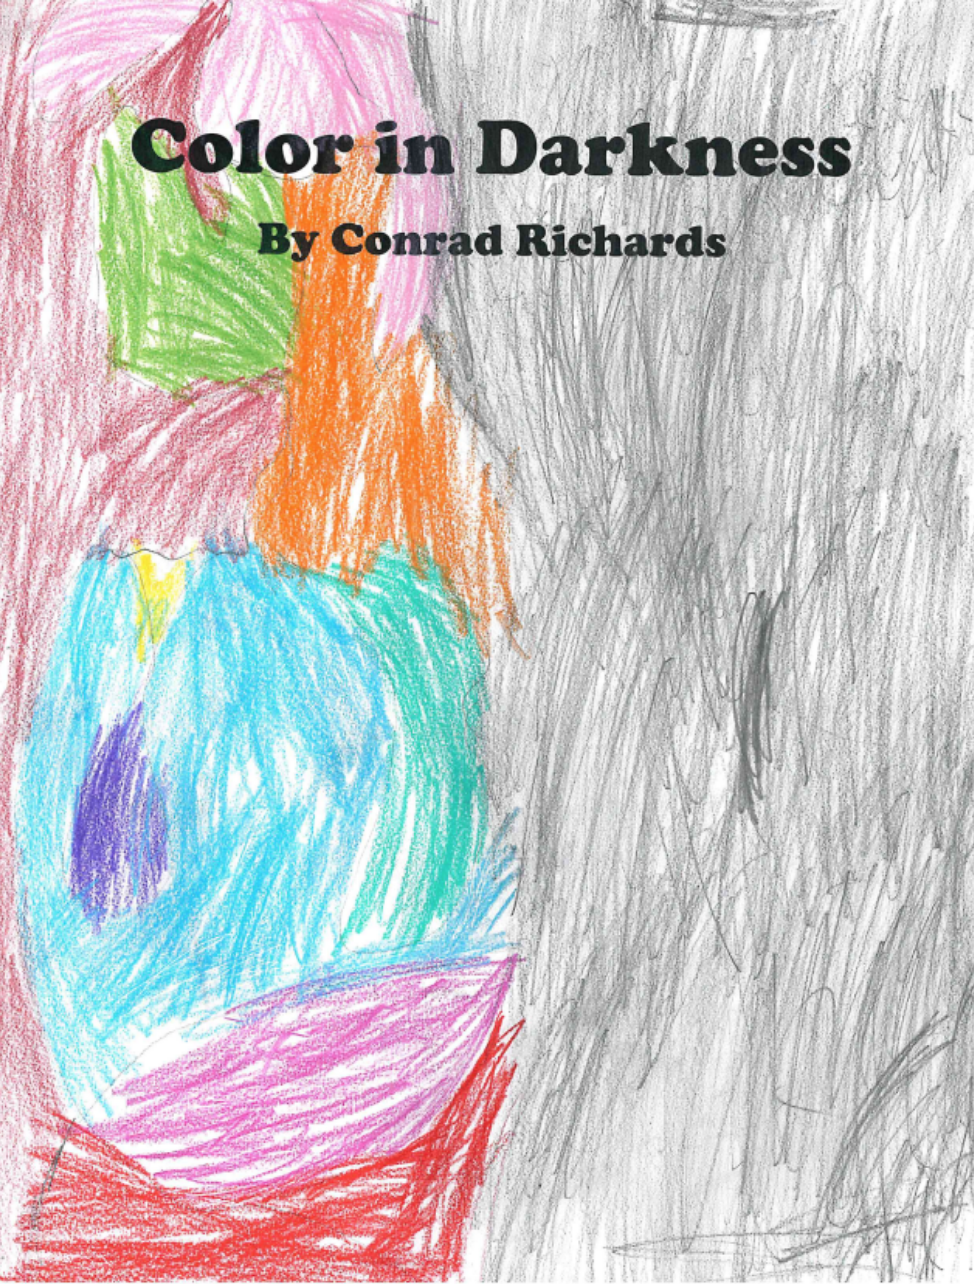 Color in Darkness book cover